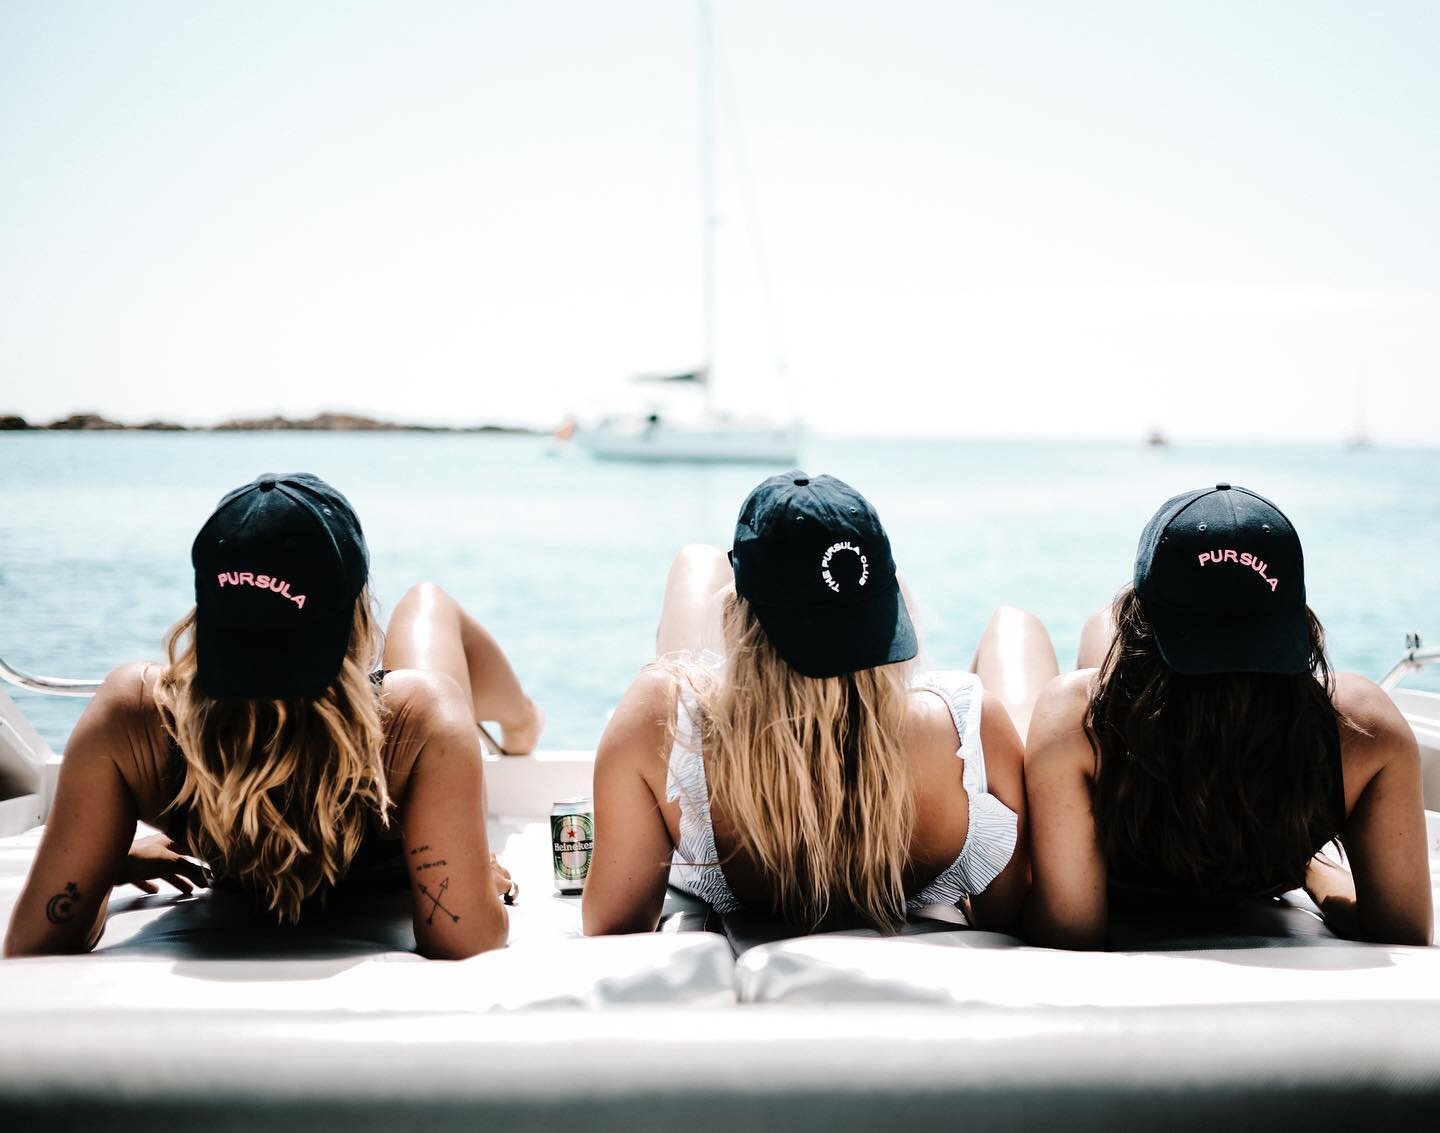 Afternoon chill, anchored at Formentera.
-
Heading to Ibiza with your crew? 
-
Book today from &pound;2,160/ &pound;180pp

#ibiza #formentera #travel #islandlife #privatecharter #yachtcharter